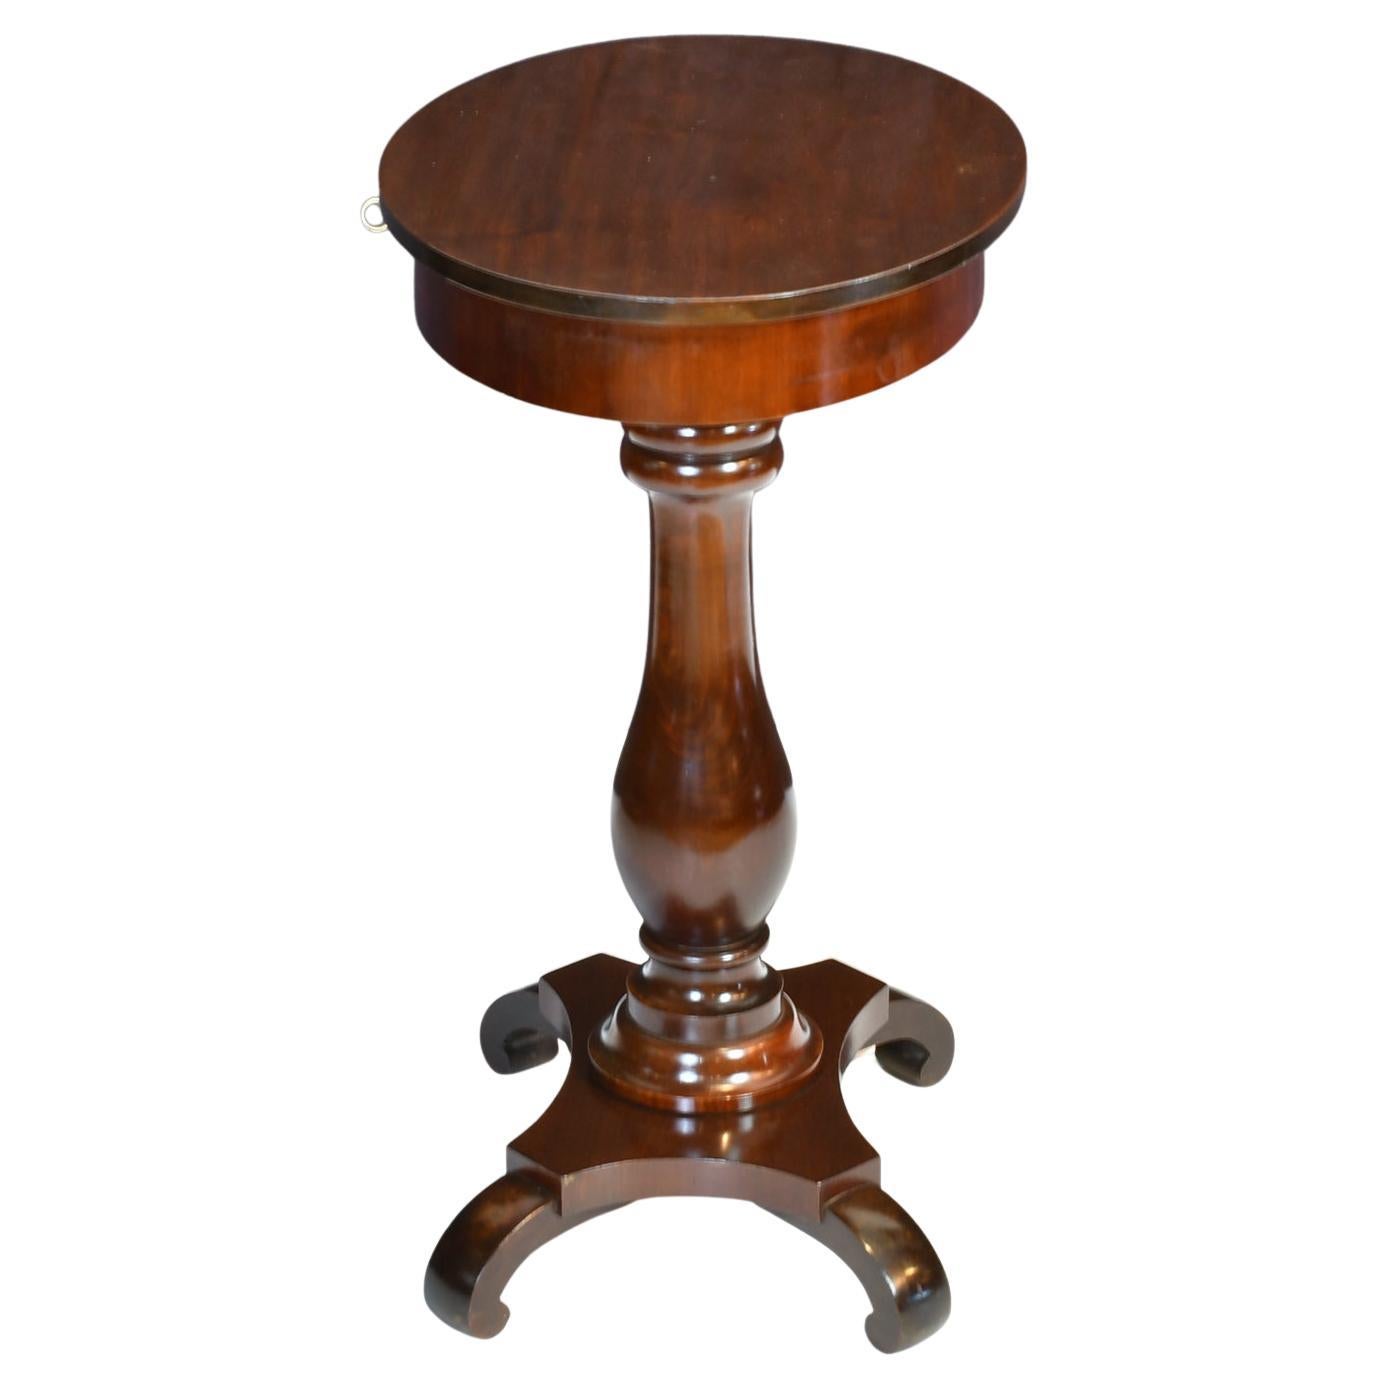 Polished Small Antique Oval Pedestal Table or Work Table in Dark-Stained Mahogany For Sale